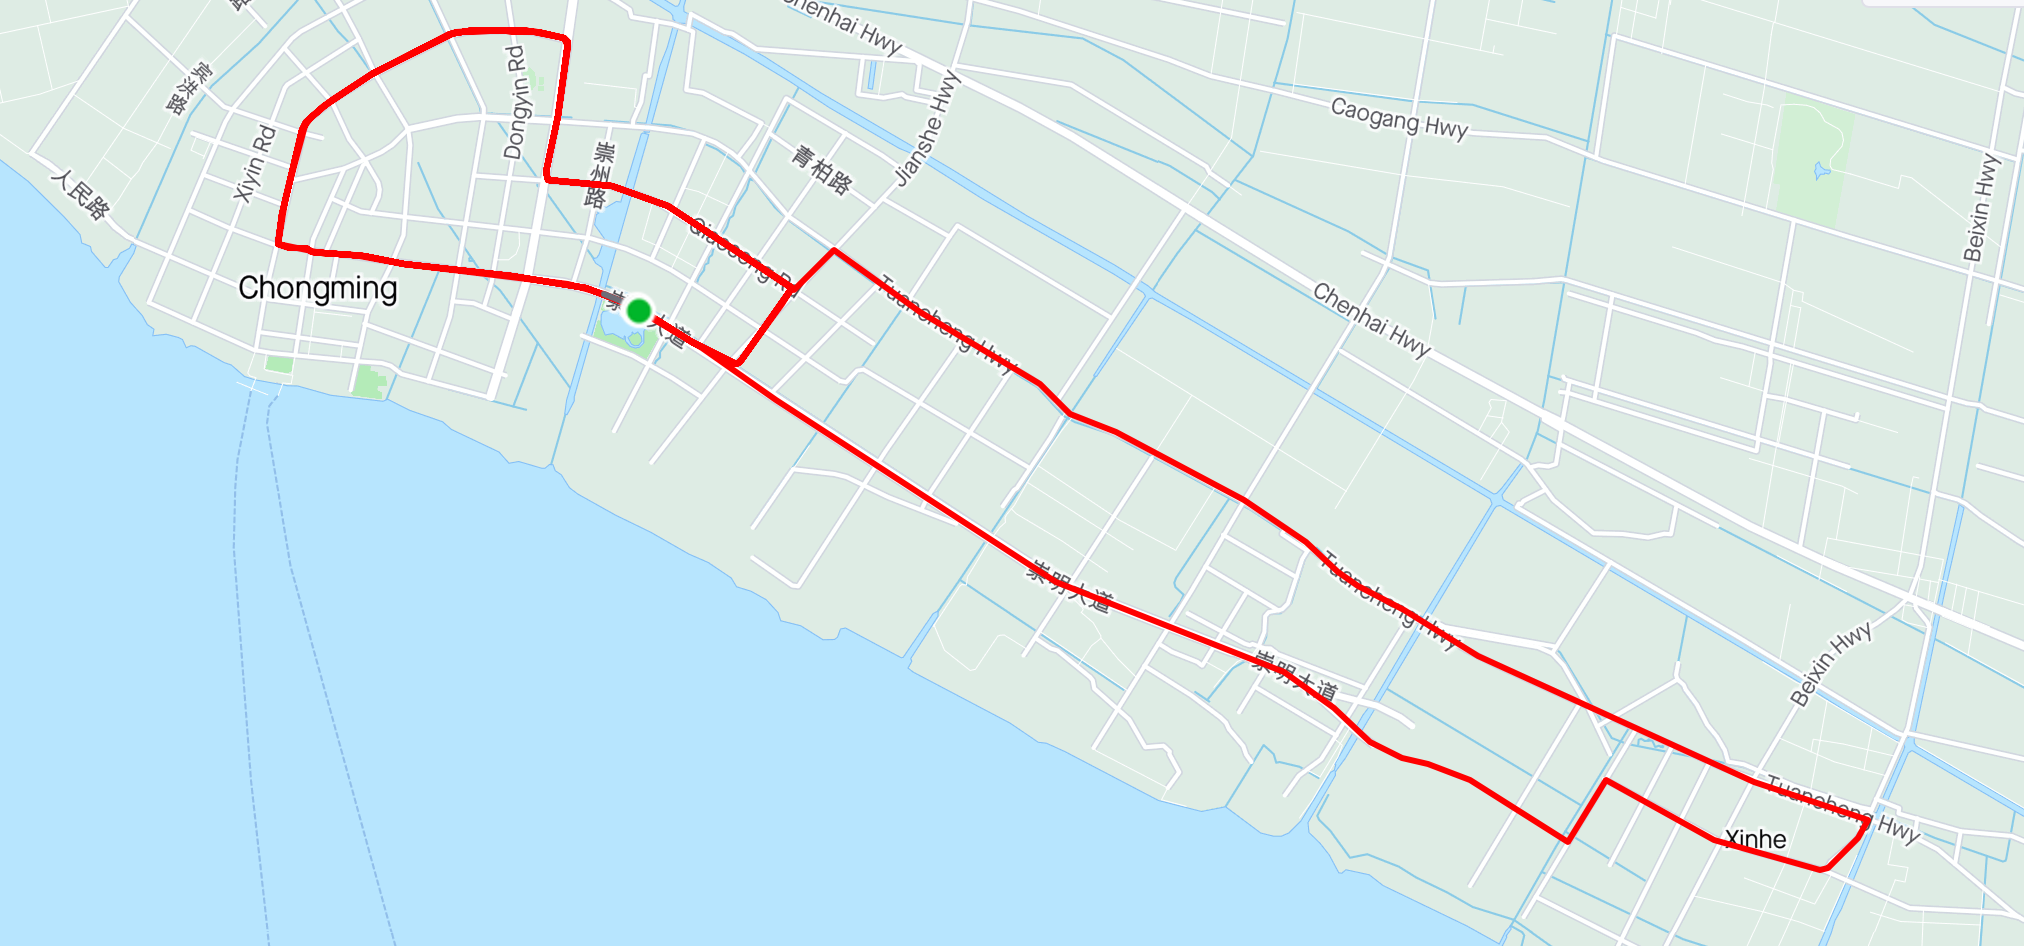 Stage 3 of the Tour of Chongming Island. The route is a circuit and is decidedly less technical, with fewer corners and long straight sections.